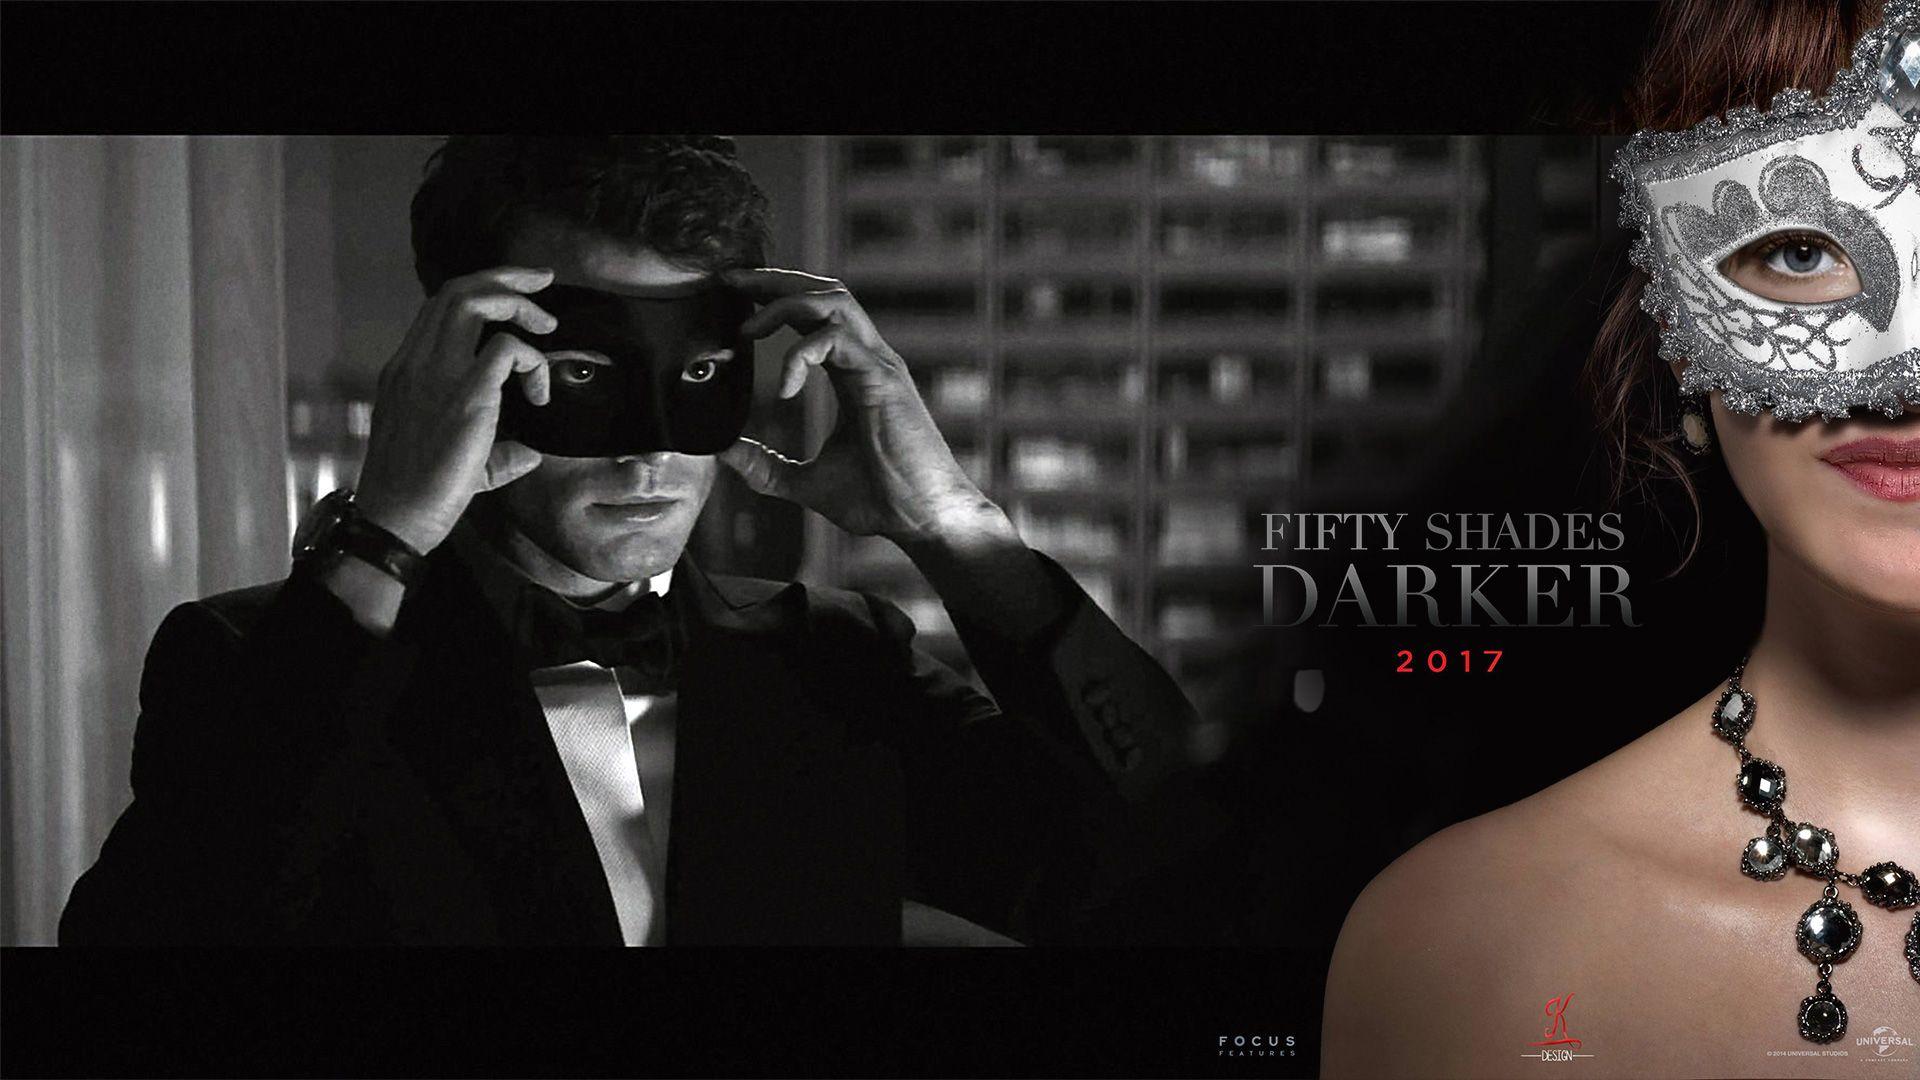 Fifty Shades Of Grey wallpaper by DLJunkie  Download on ZEDGE  2b53